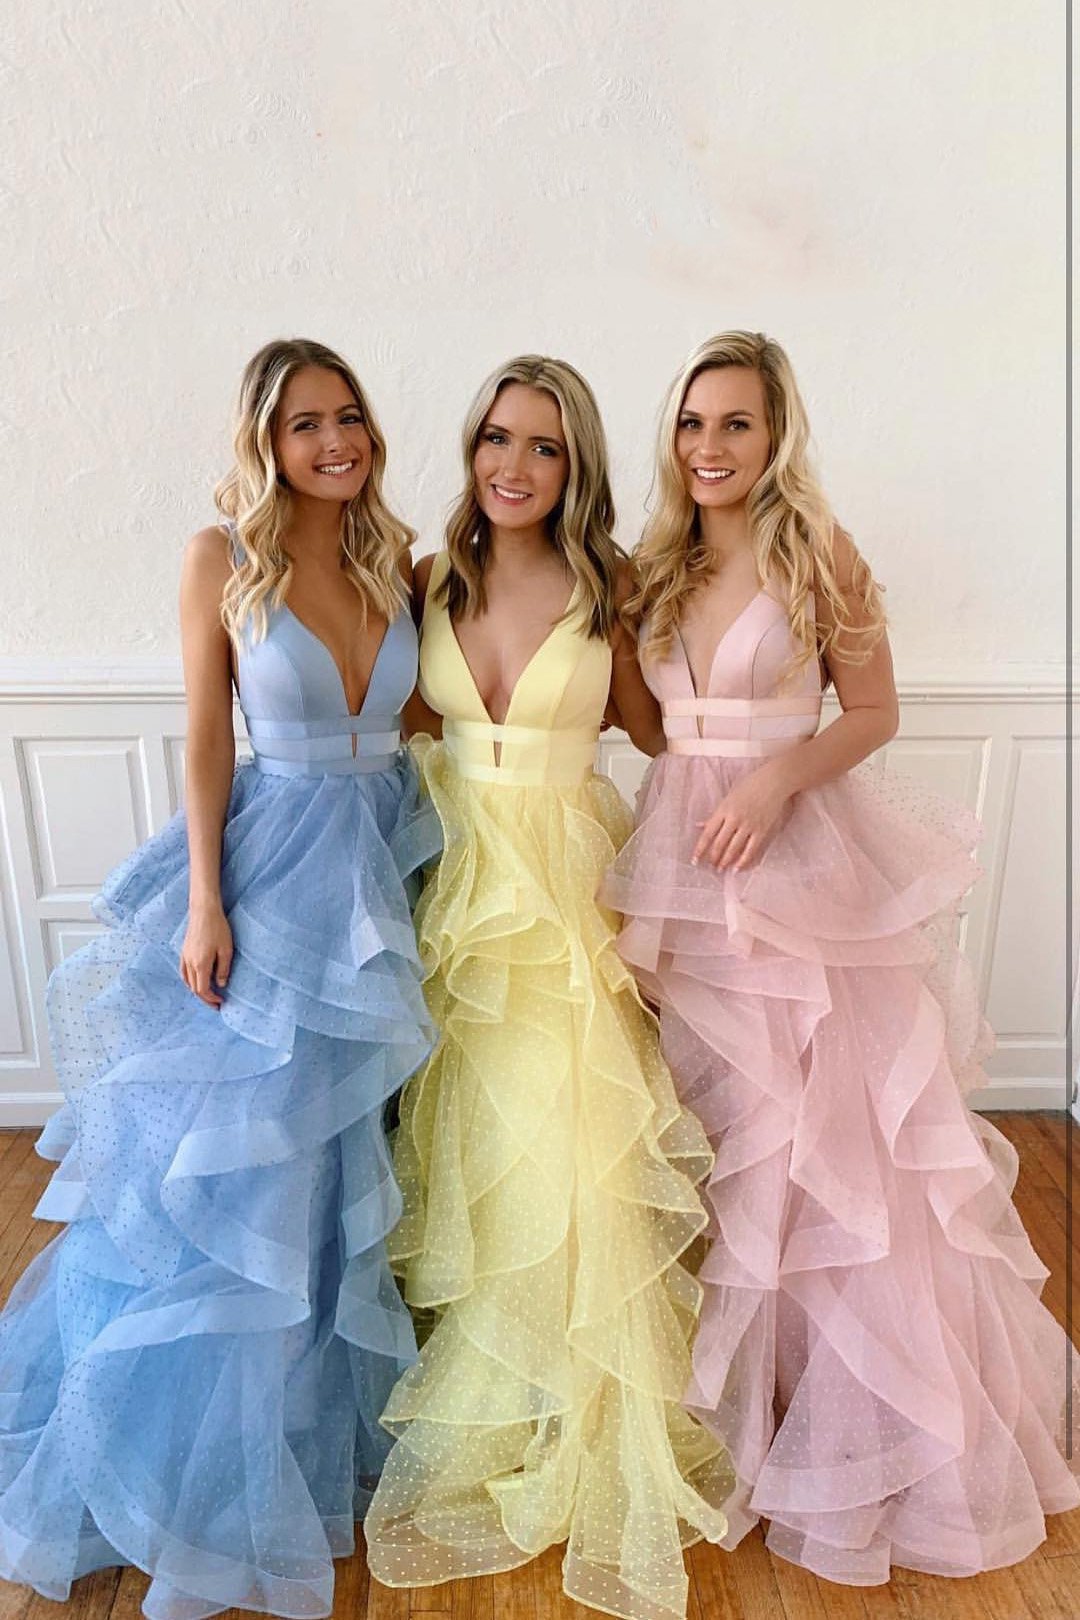 Pink Strapless Princess Tulle Layers Ruffles Long Prom Dress, Pink Formal Evening Dress US 14 / Custom Color